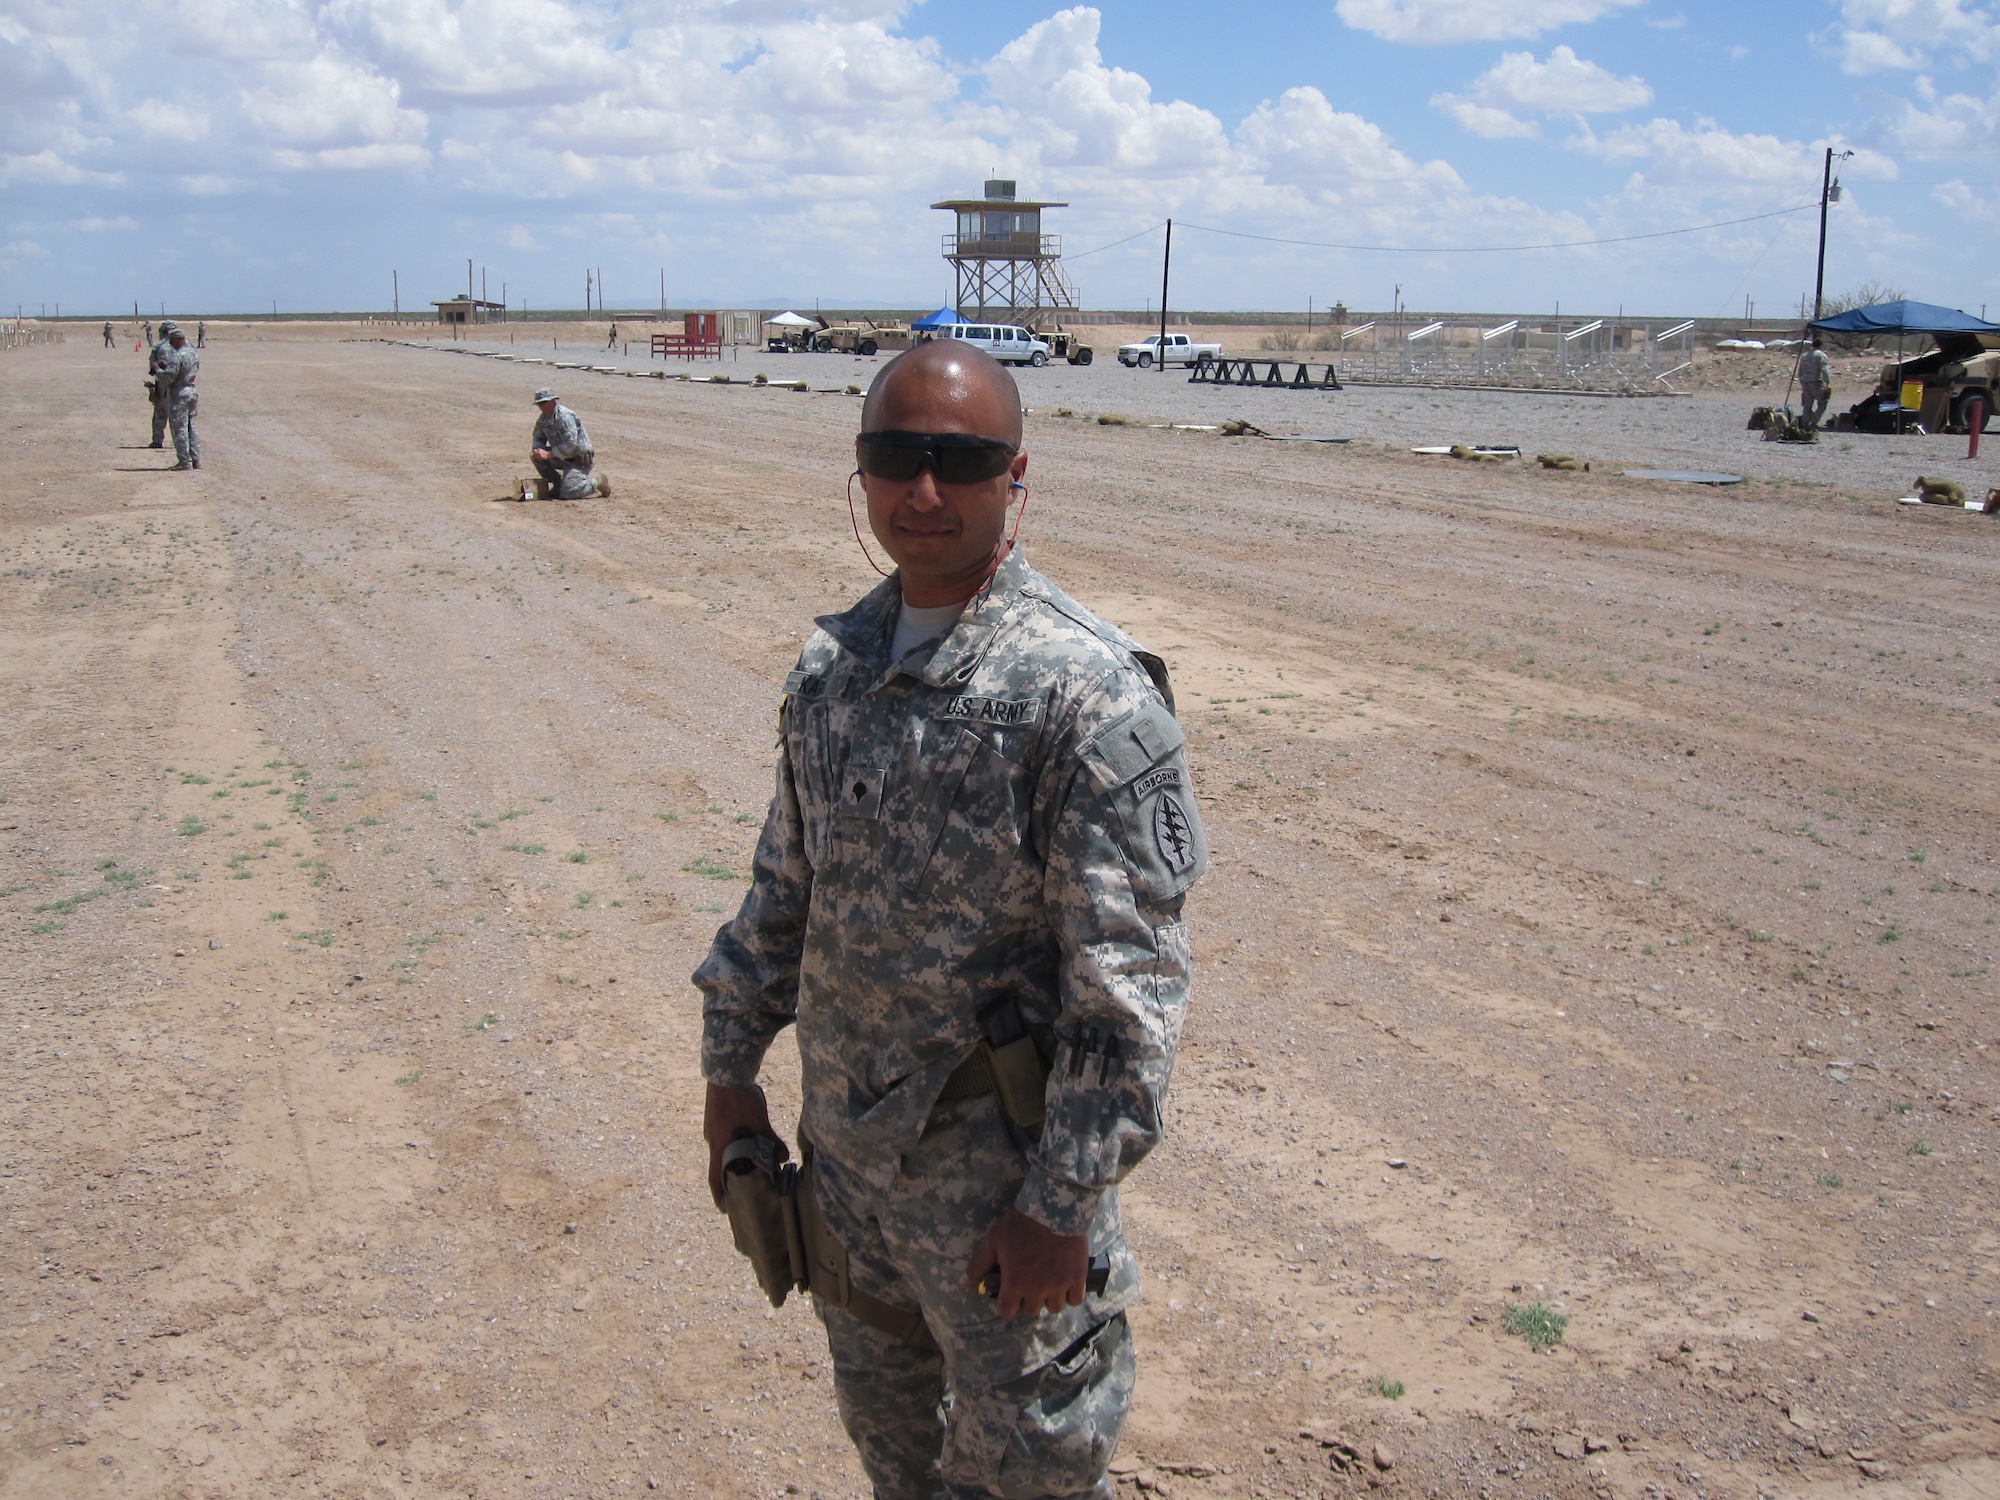 GSB student Preetam Karki served as a CBRN specialist in the United States Army. He was stationed with the Special Forces in Afghanistan and Pakistan. 